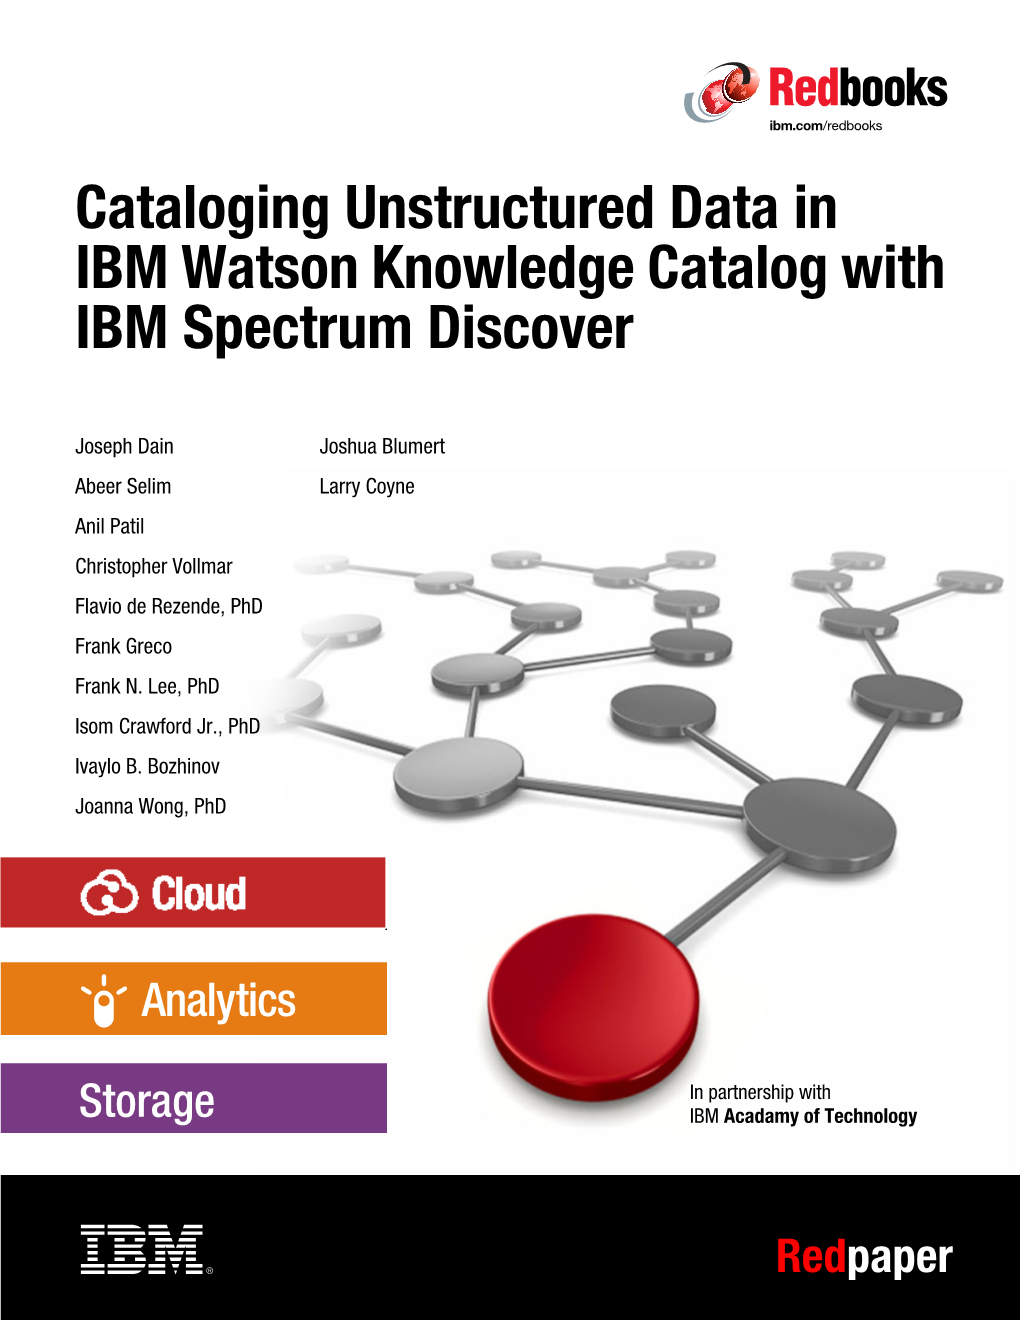 Cataloging Unstructured Data in IBM Watson Knowledge Catalog with IBM Spectrum Discover